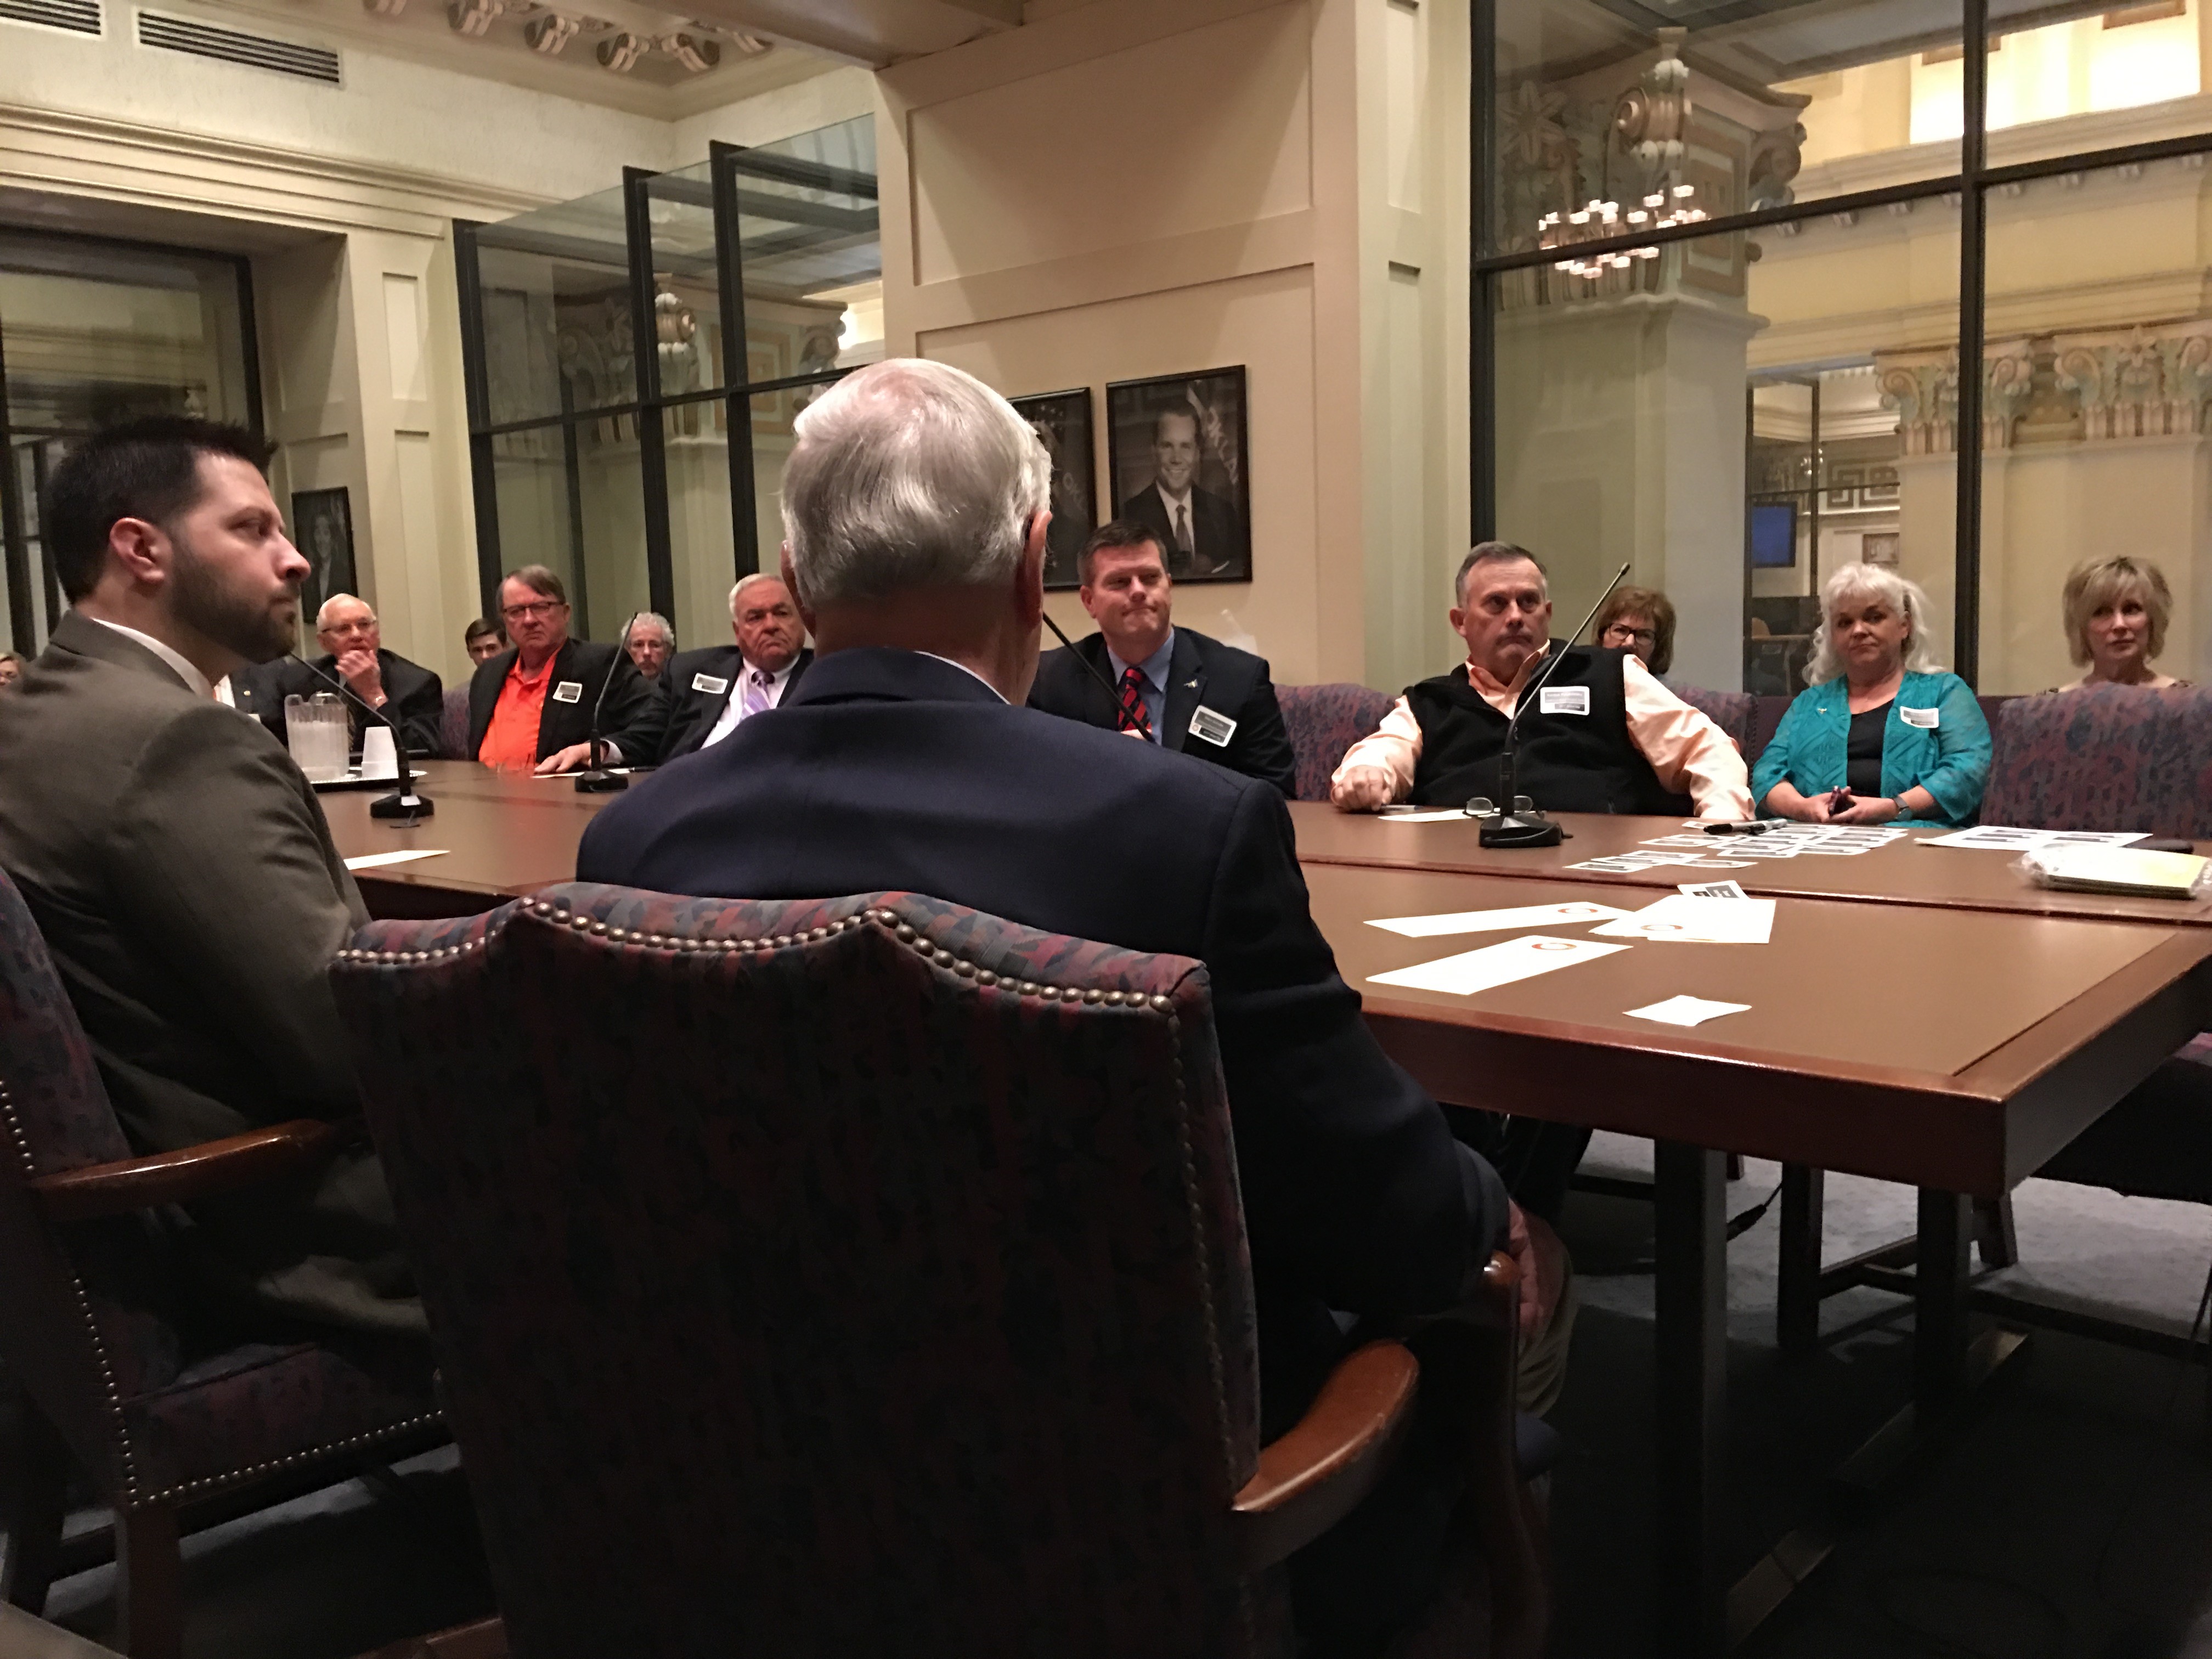 Wheat Industry Leaders Meet and Greet with Oklahoma Lawmakers During Wheat Day at the Capitol